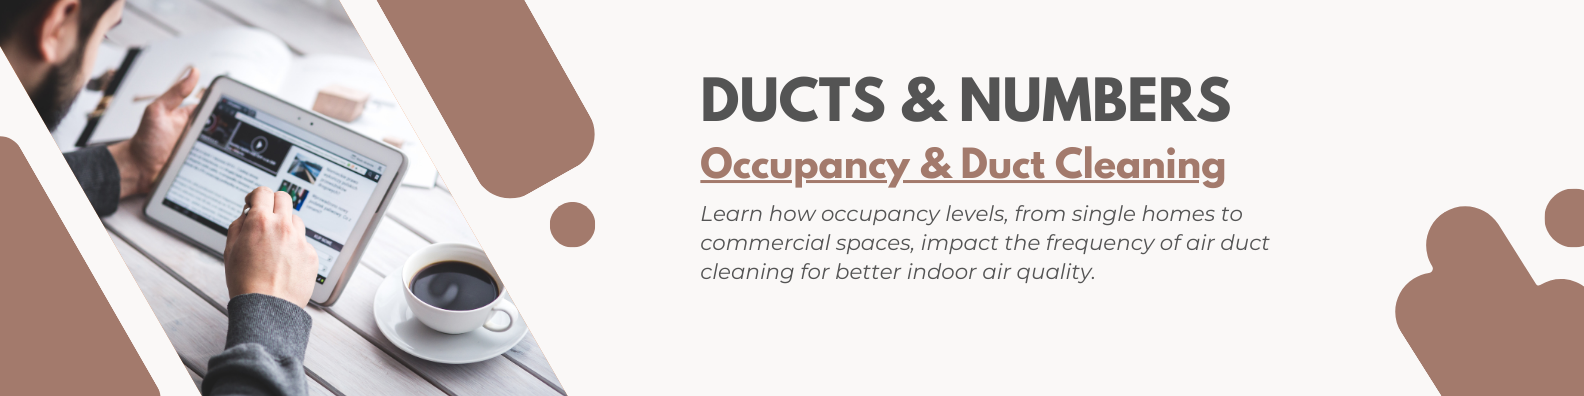 Occupancy & Duct Cleaning